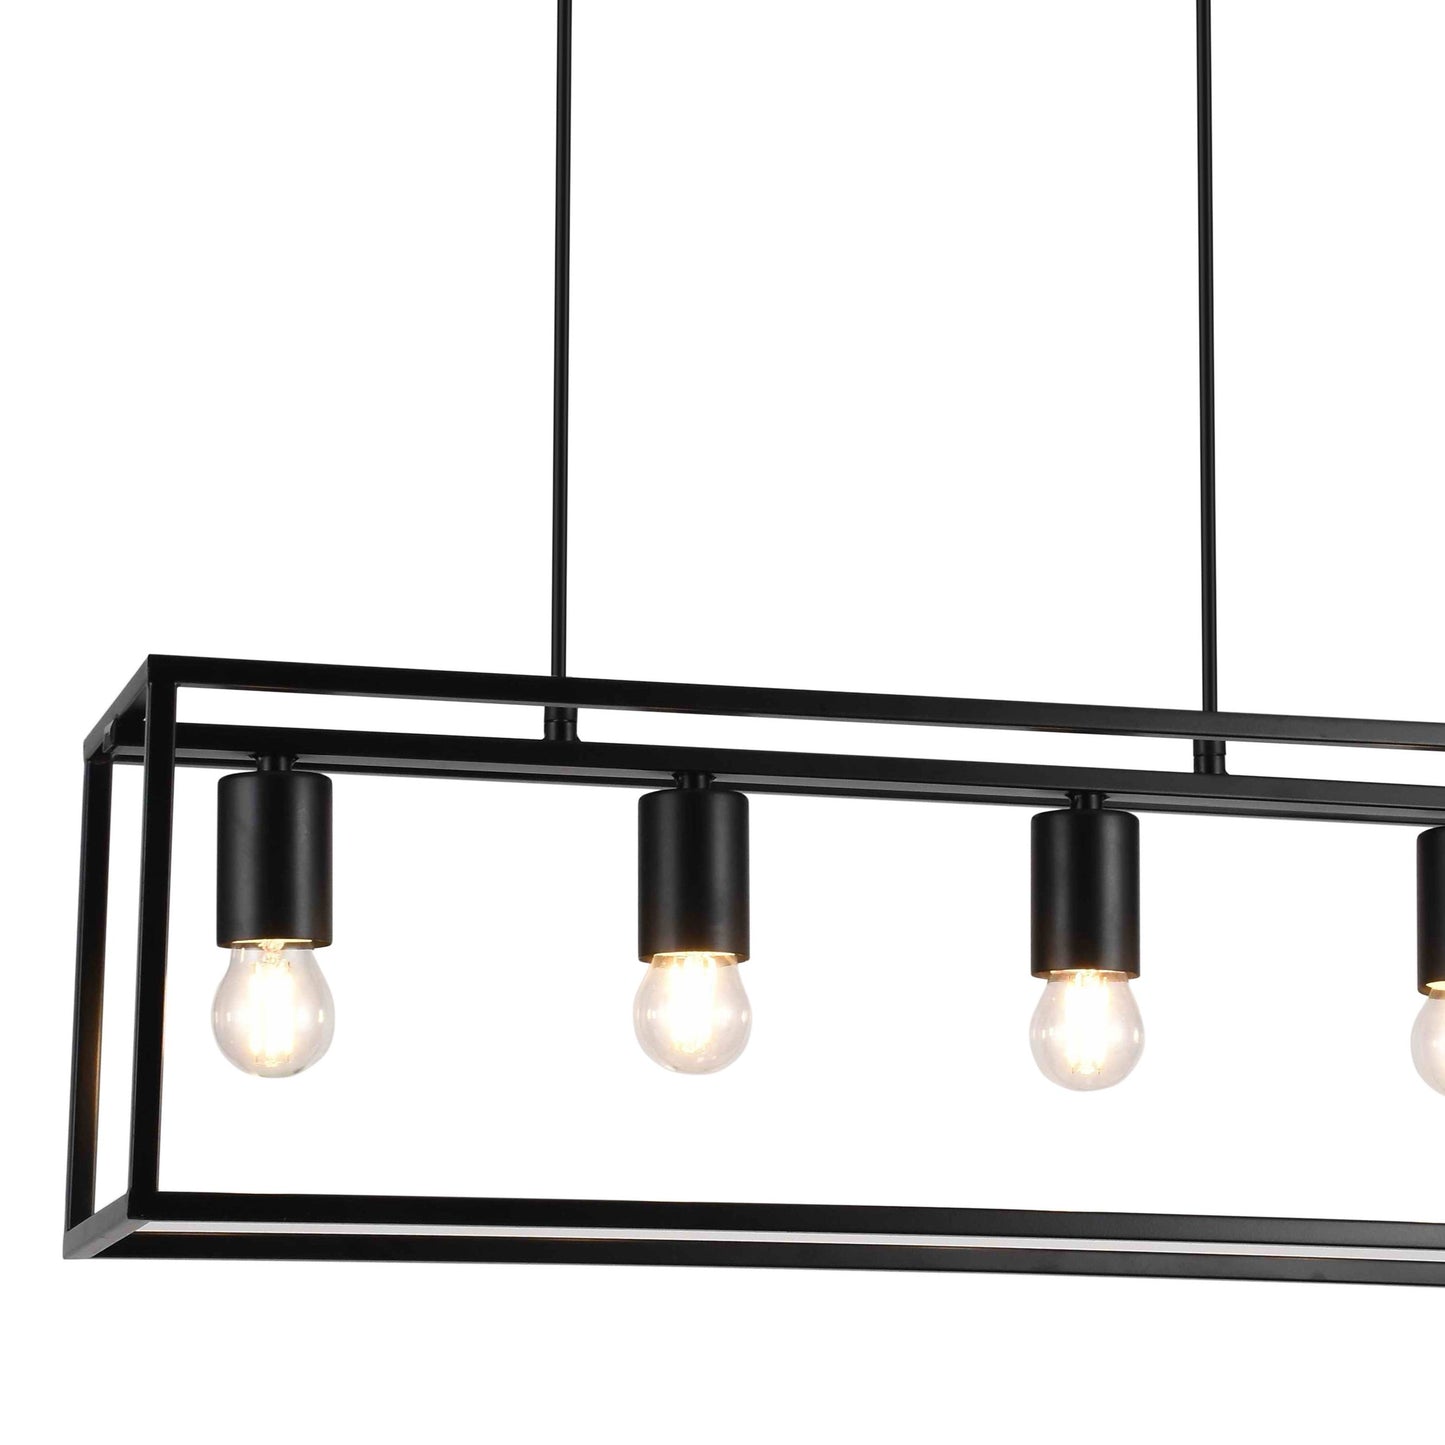 The Molly rectangle ceiling pendant light is a contemporary addition to your home decor. This adjustable black rectangular ceiling pendant light is complimented with 4 light fittings and will add a modern element to any home or commercial property, Would look great positioned over a bar, kitchen island or dining table The adjustable height makes it perfect for any space, helping you customize the lighting to your home or commercial property.